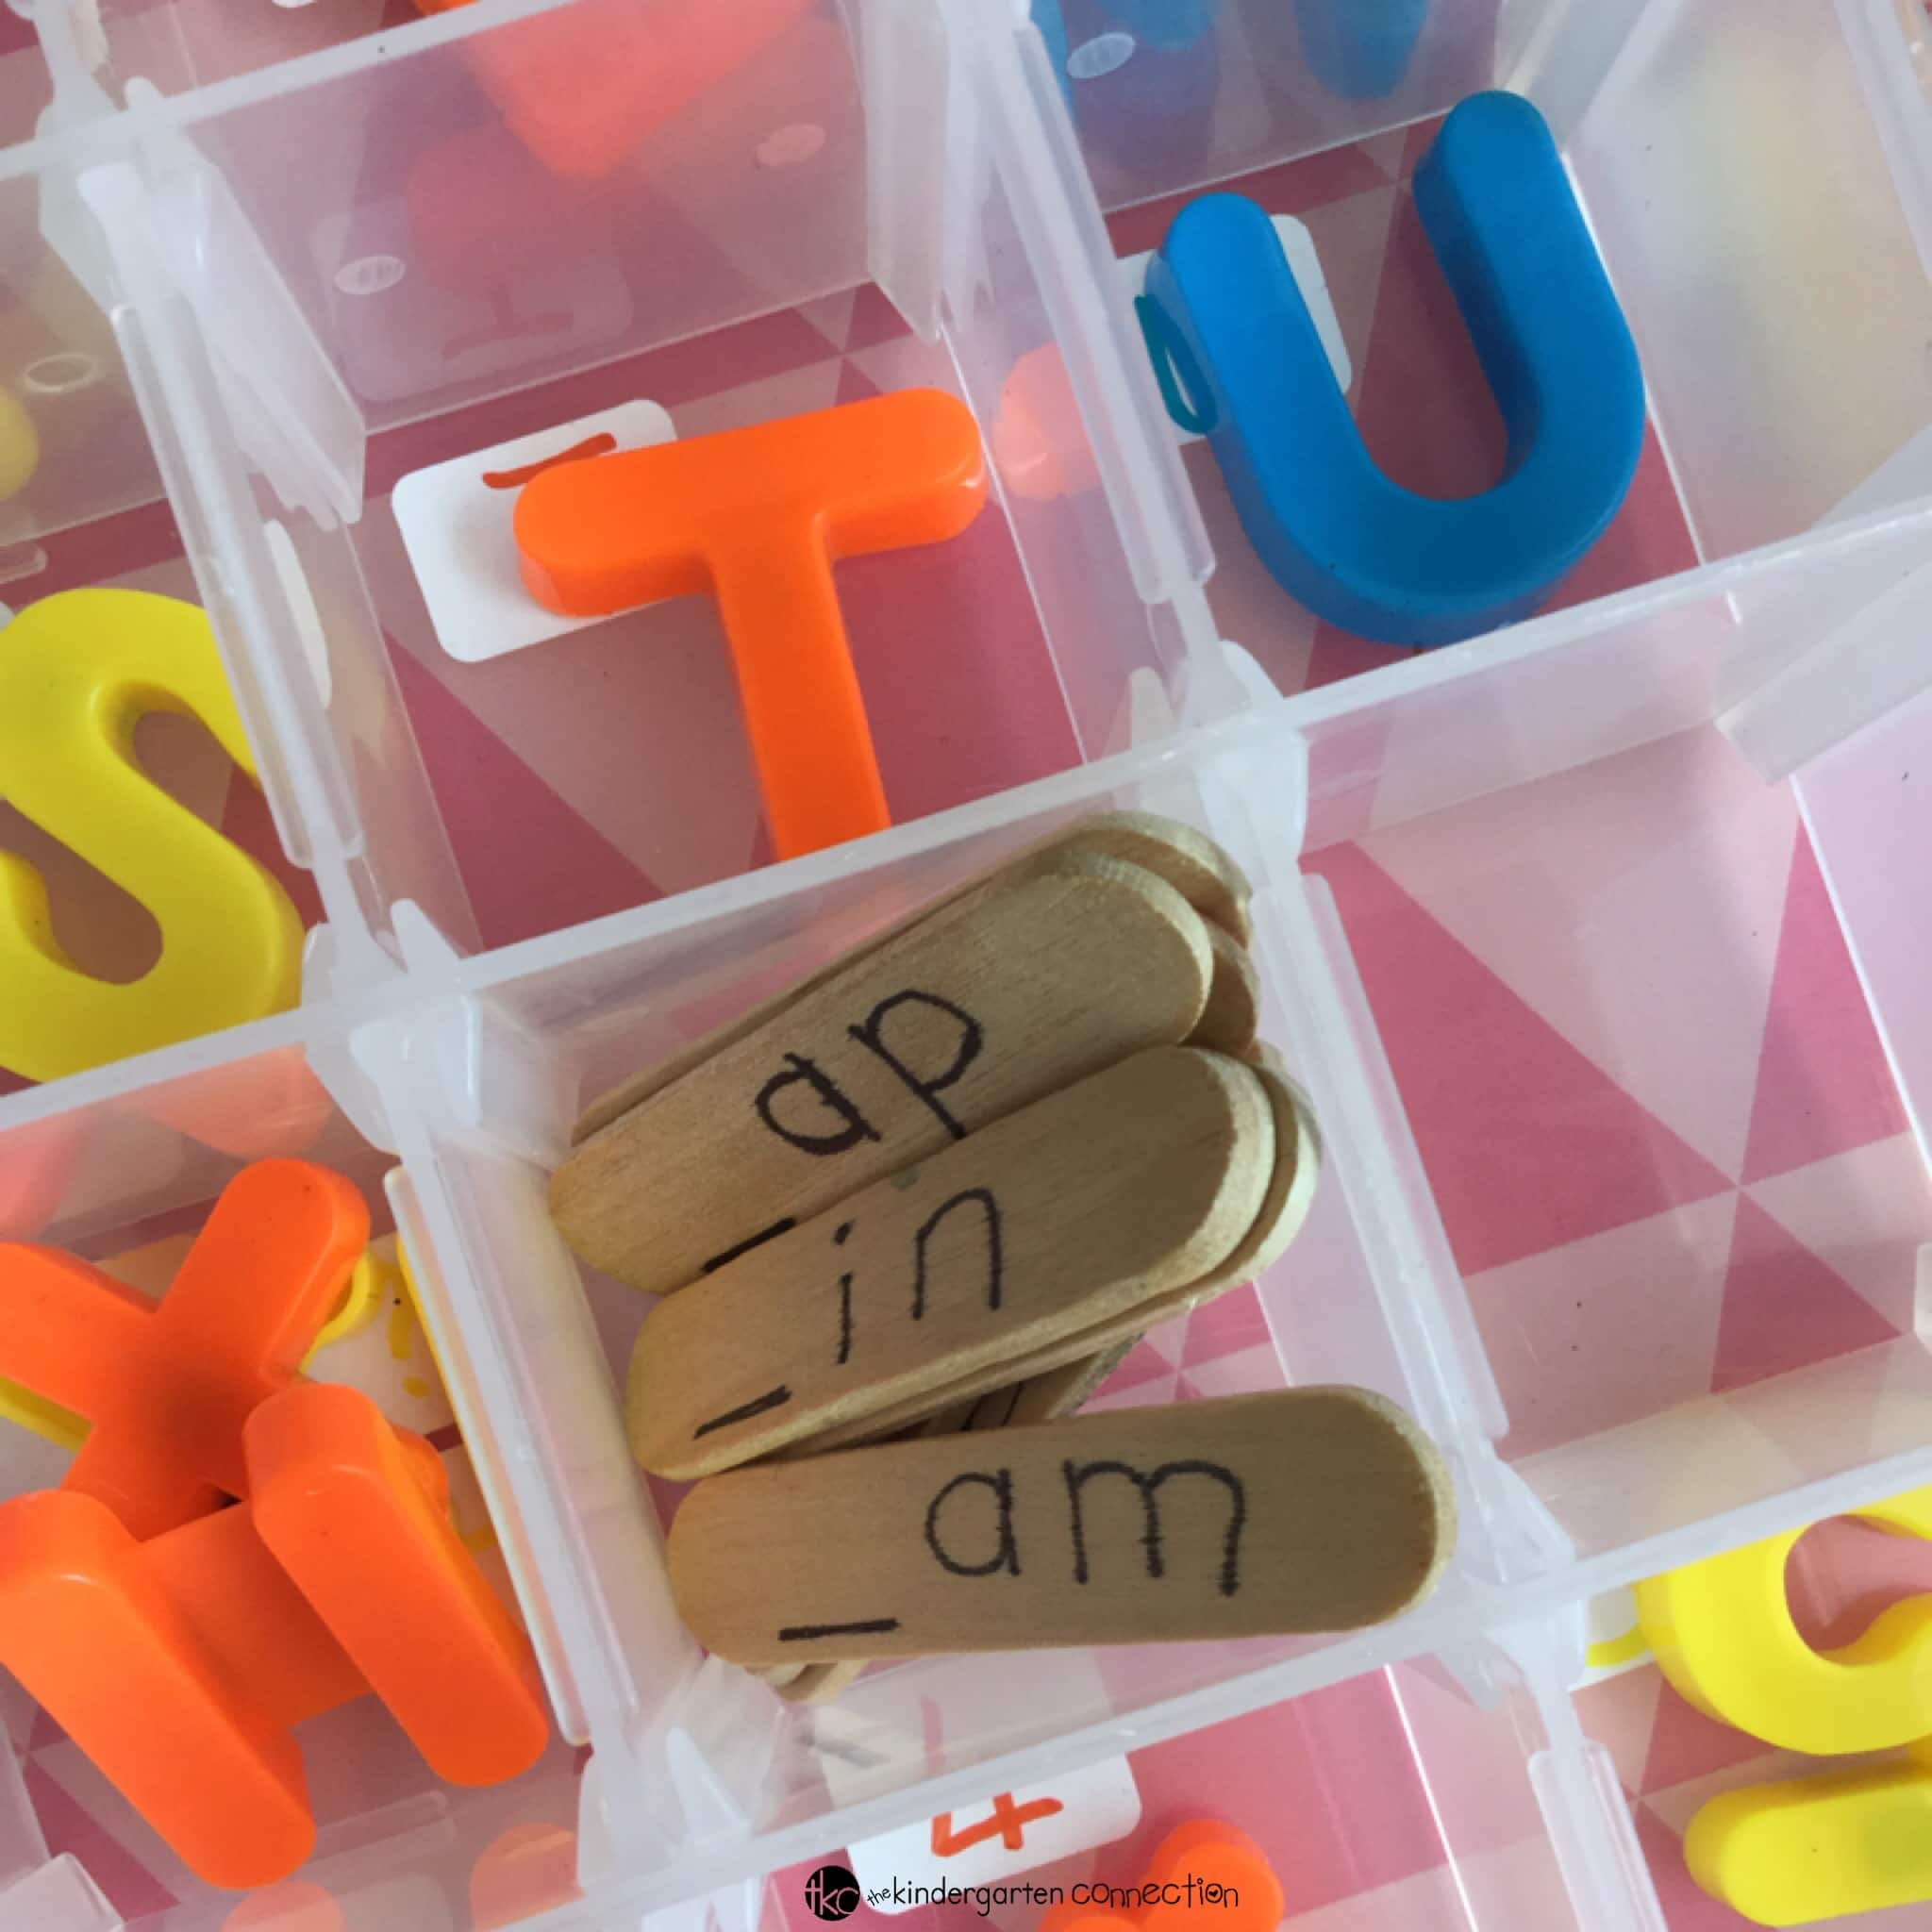 Encourage letter and sound recognition with this never ending CVC word game that can be used in a classroom or at home. Teach CVC words hands-on!